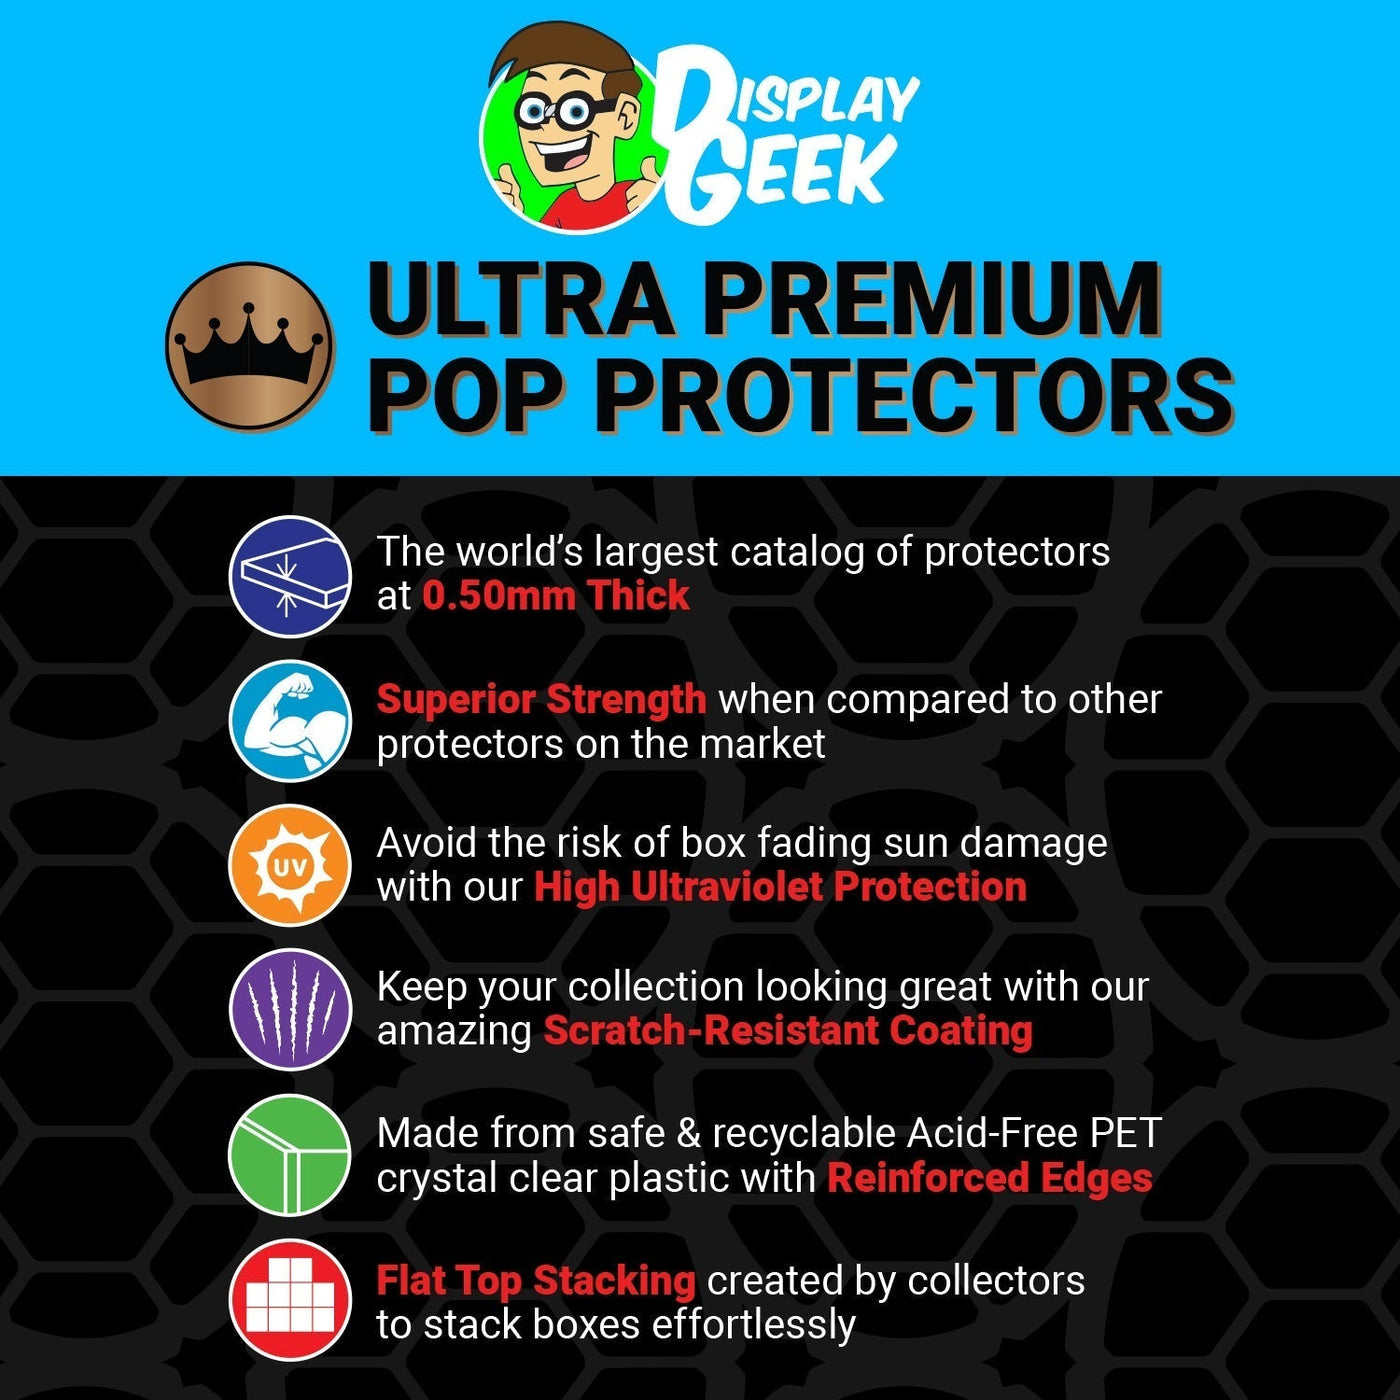 Pop Protector for Vynl 2 Pack Rick & Morty Funko on The Protector Guide App by Display Geek